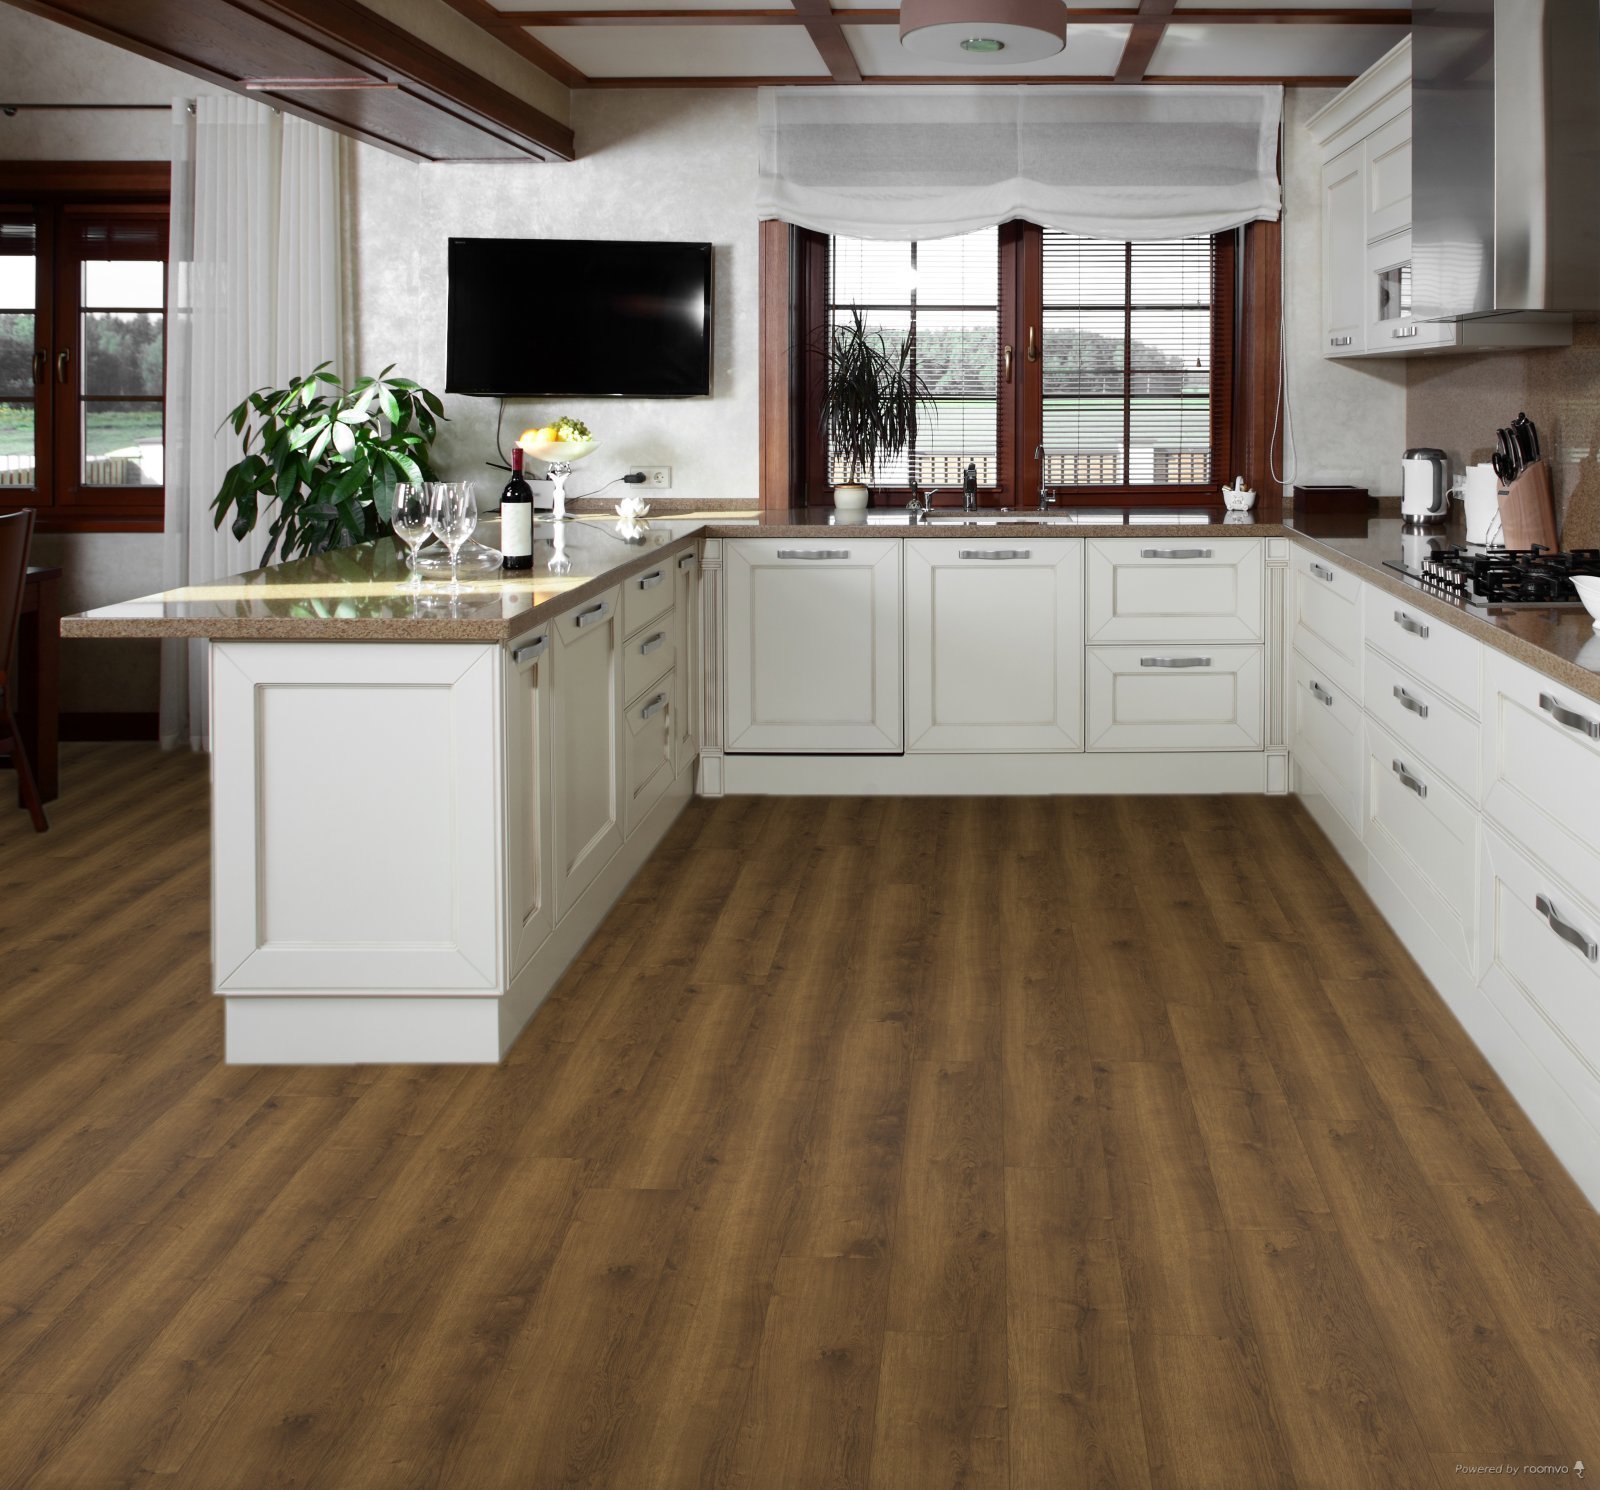 Horizen Flooring presents to you a picture of a quality wide plank Fawn luxury vinyl plank. NovoCore Premium collection features a wide range of colors & designs that will compliment any interior. Natural wood grain synchronized surface allow for an authentic hardwood look & feel. This collection features a 0.25″ / 6.5 mm overall thickness and a durable 22 mil / 0.55 mm wear layer for residential and commercial applications.